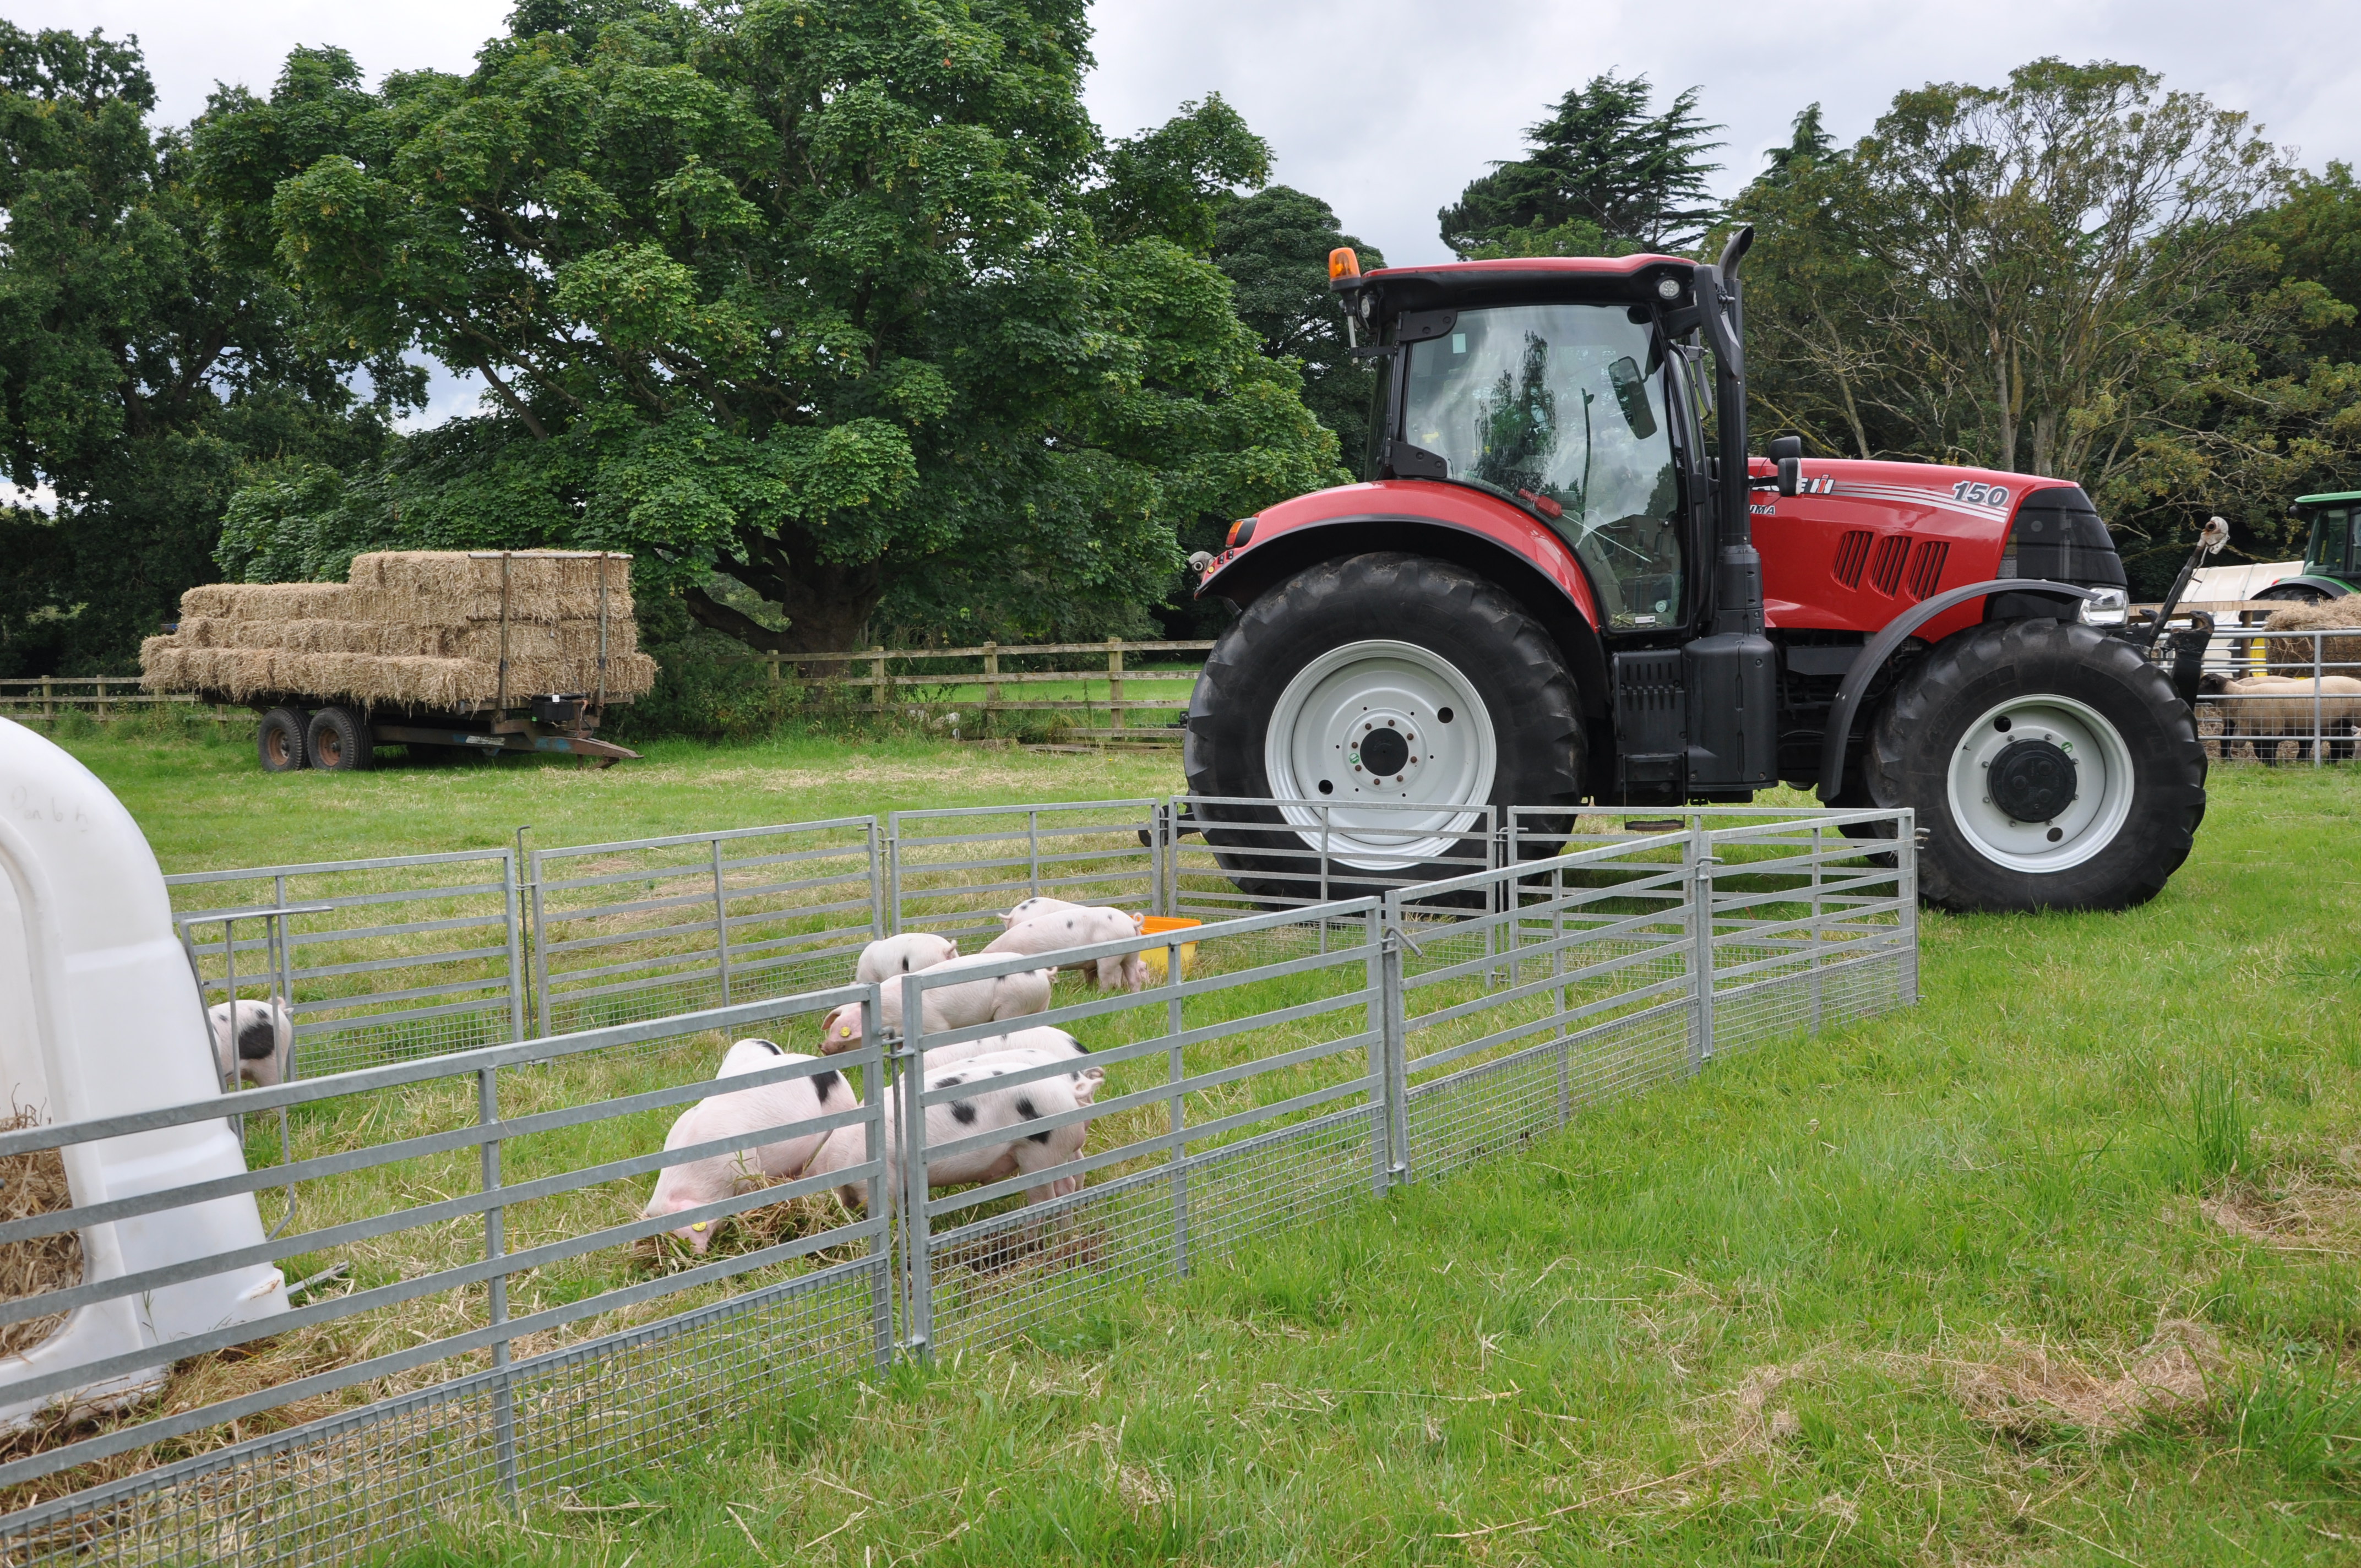 A tractor in a field with a group of pigs